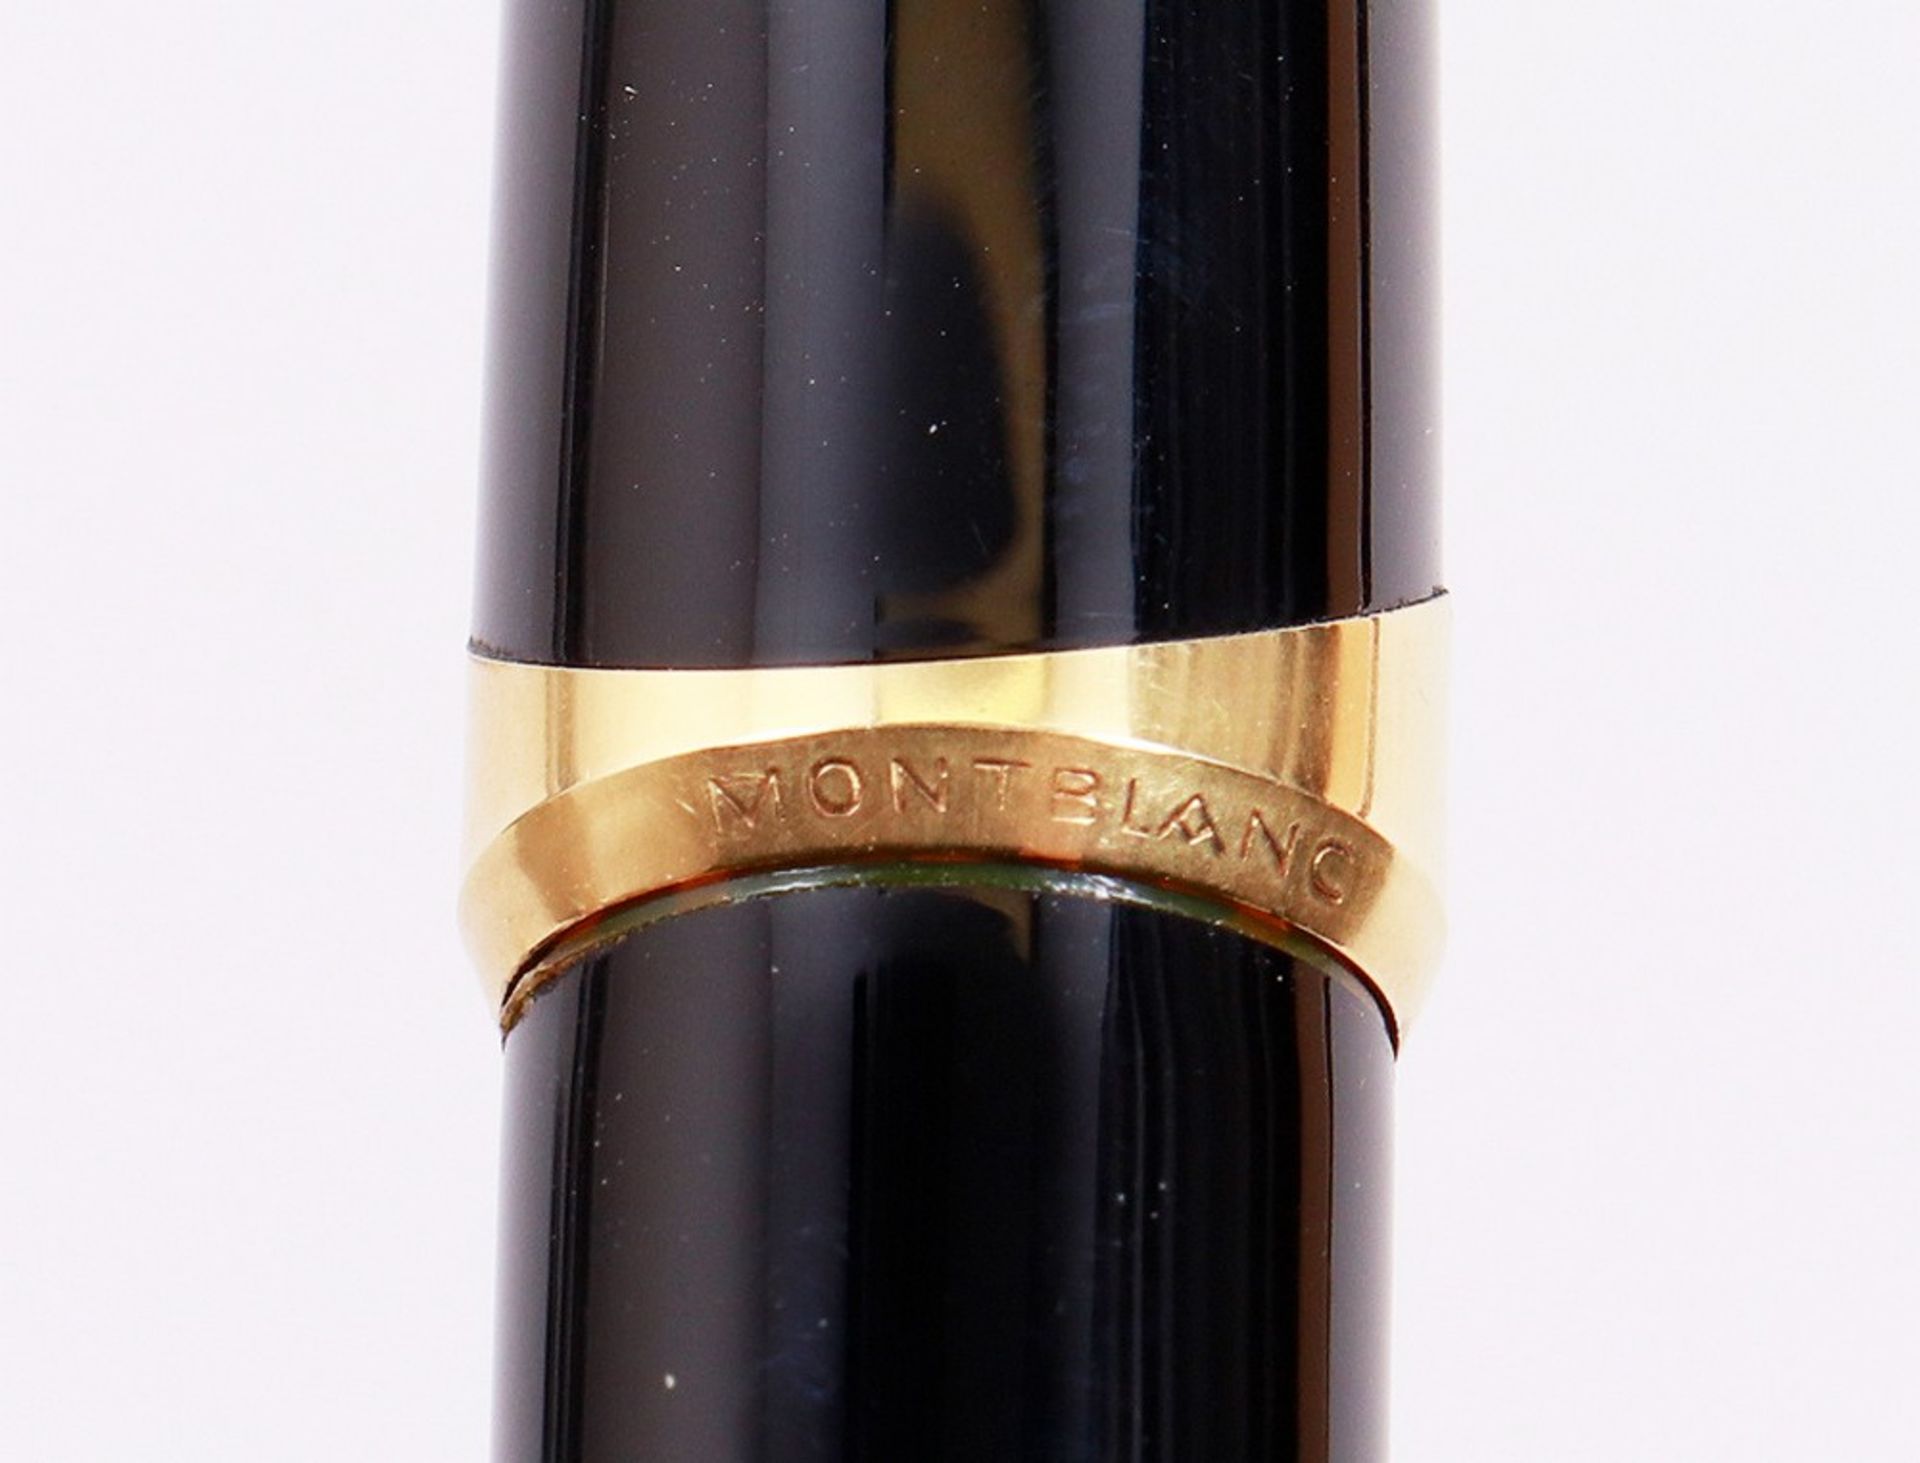 Fountain pen in a case, Montblanc, model "121", 1960s - Image 4 of 6